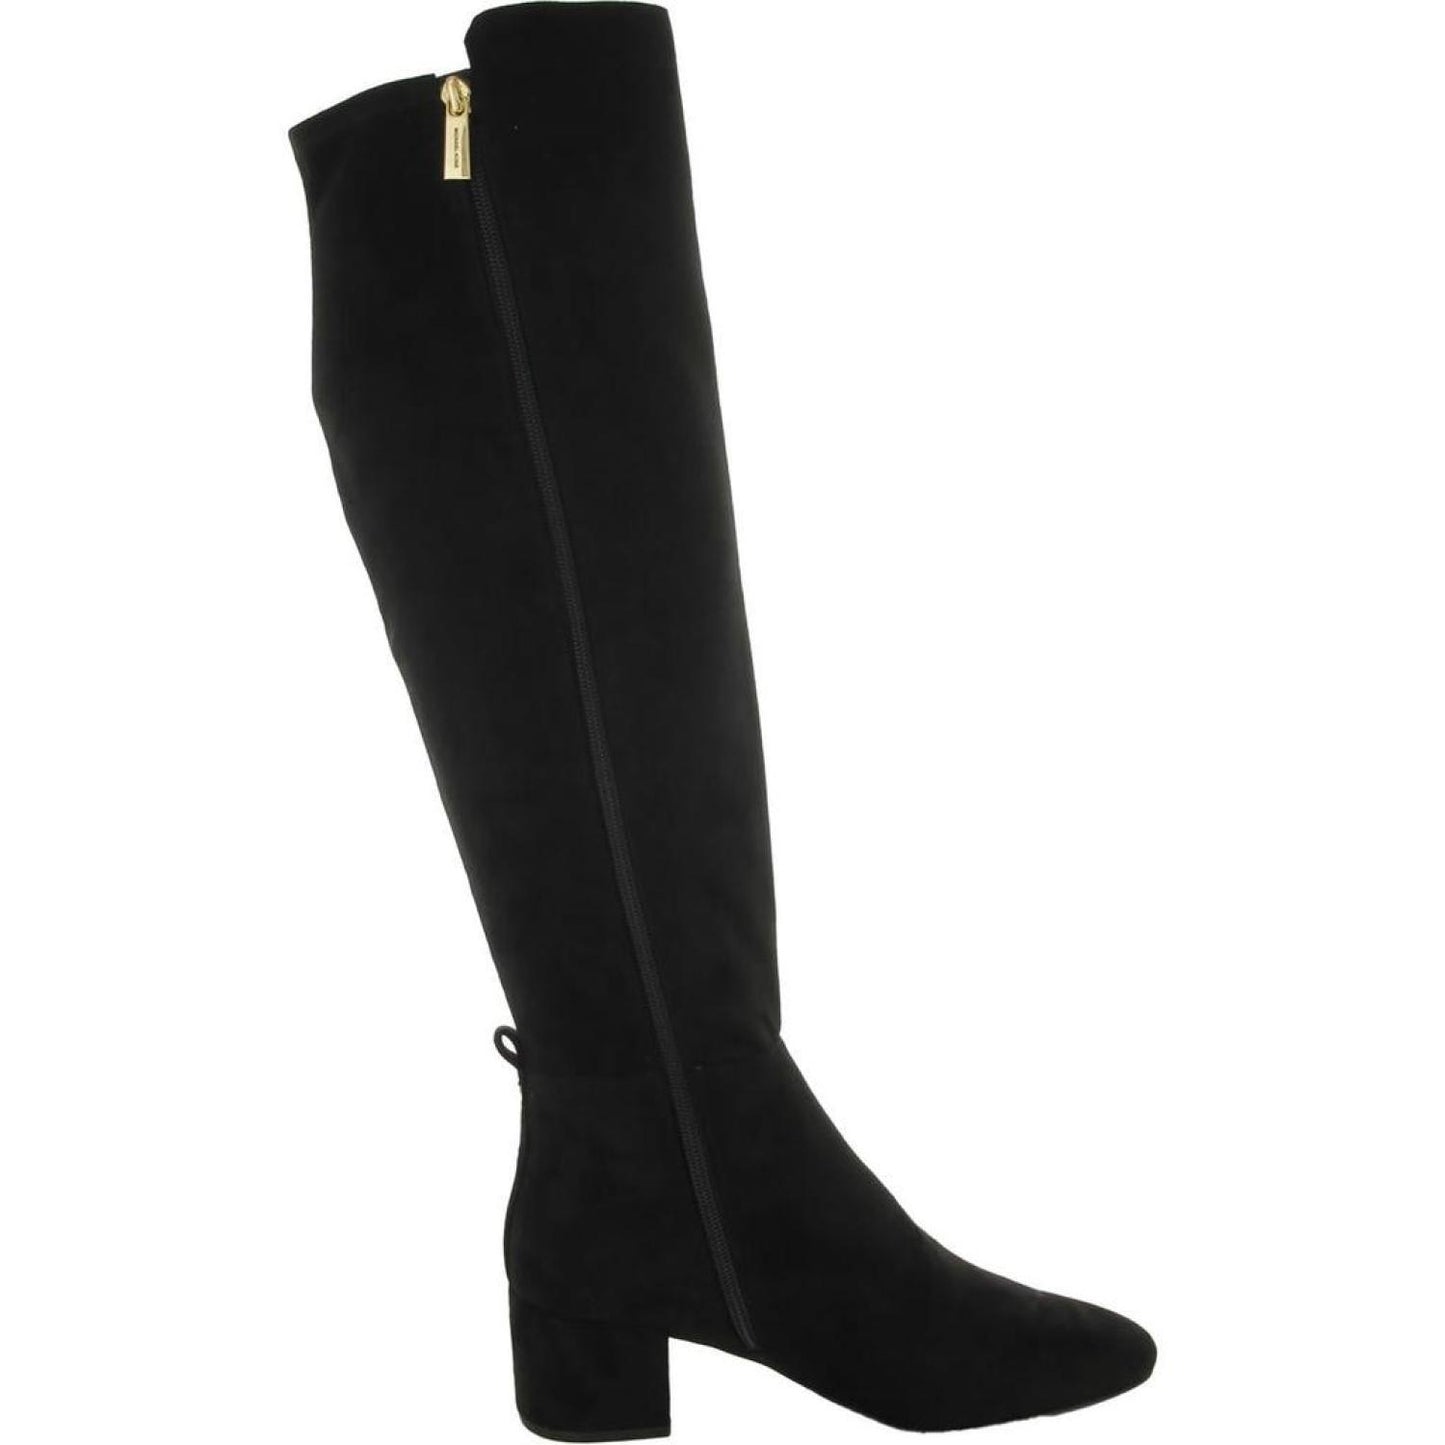 Womens Faux Suede Tall Over-The-Knee Boots